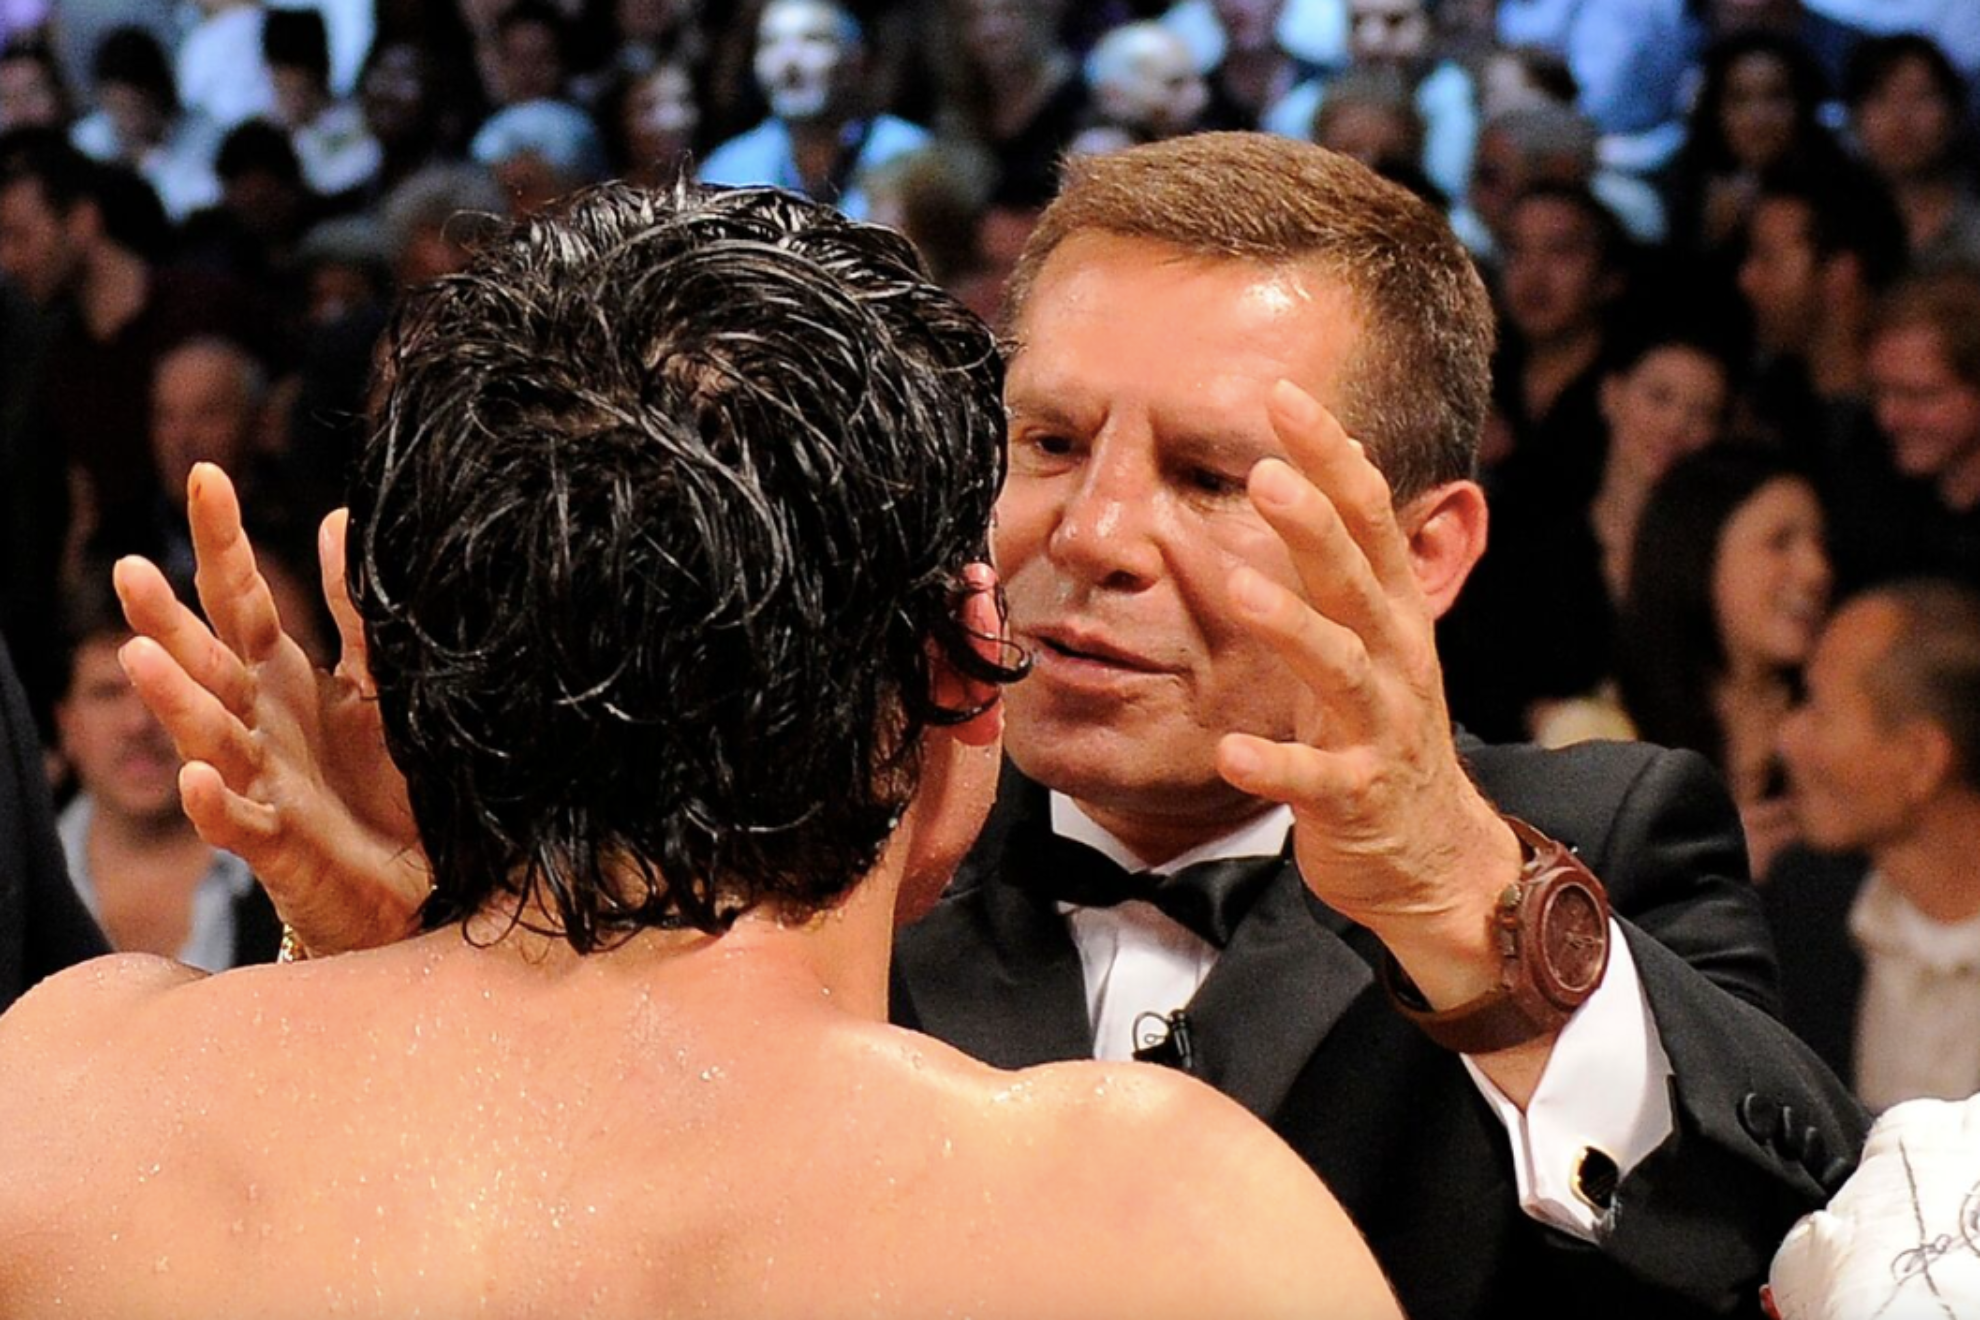 Julio Cesar Chavez: I hurt my son Julio a lot and the patterns repeat themselves